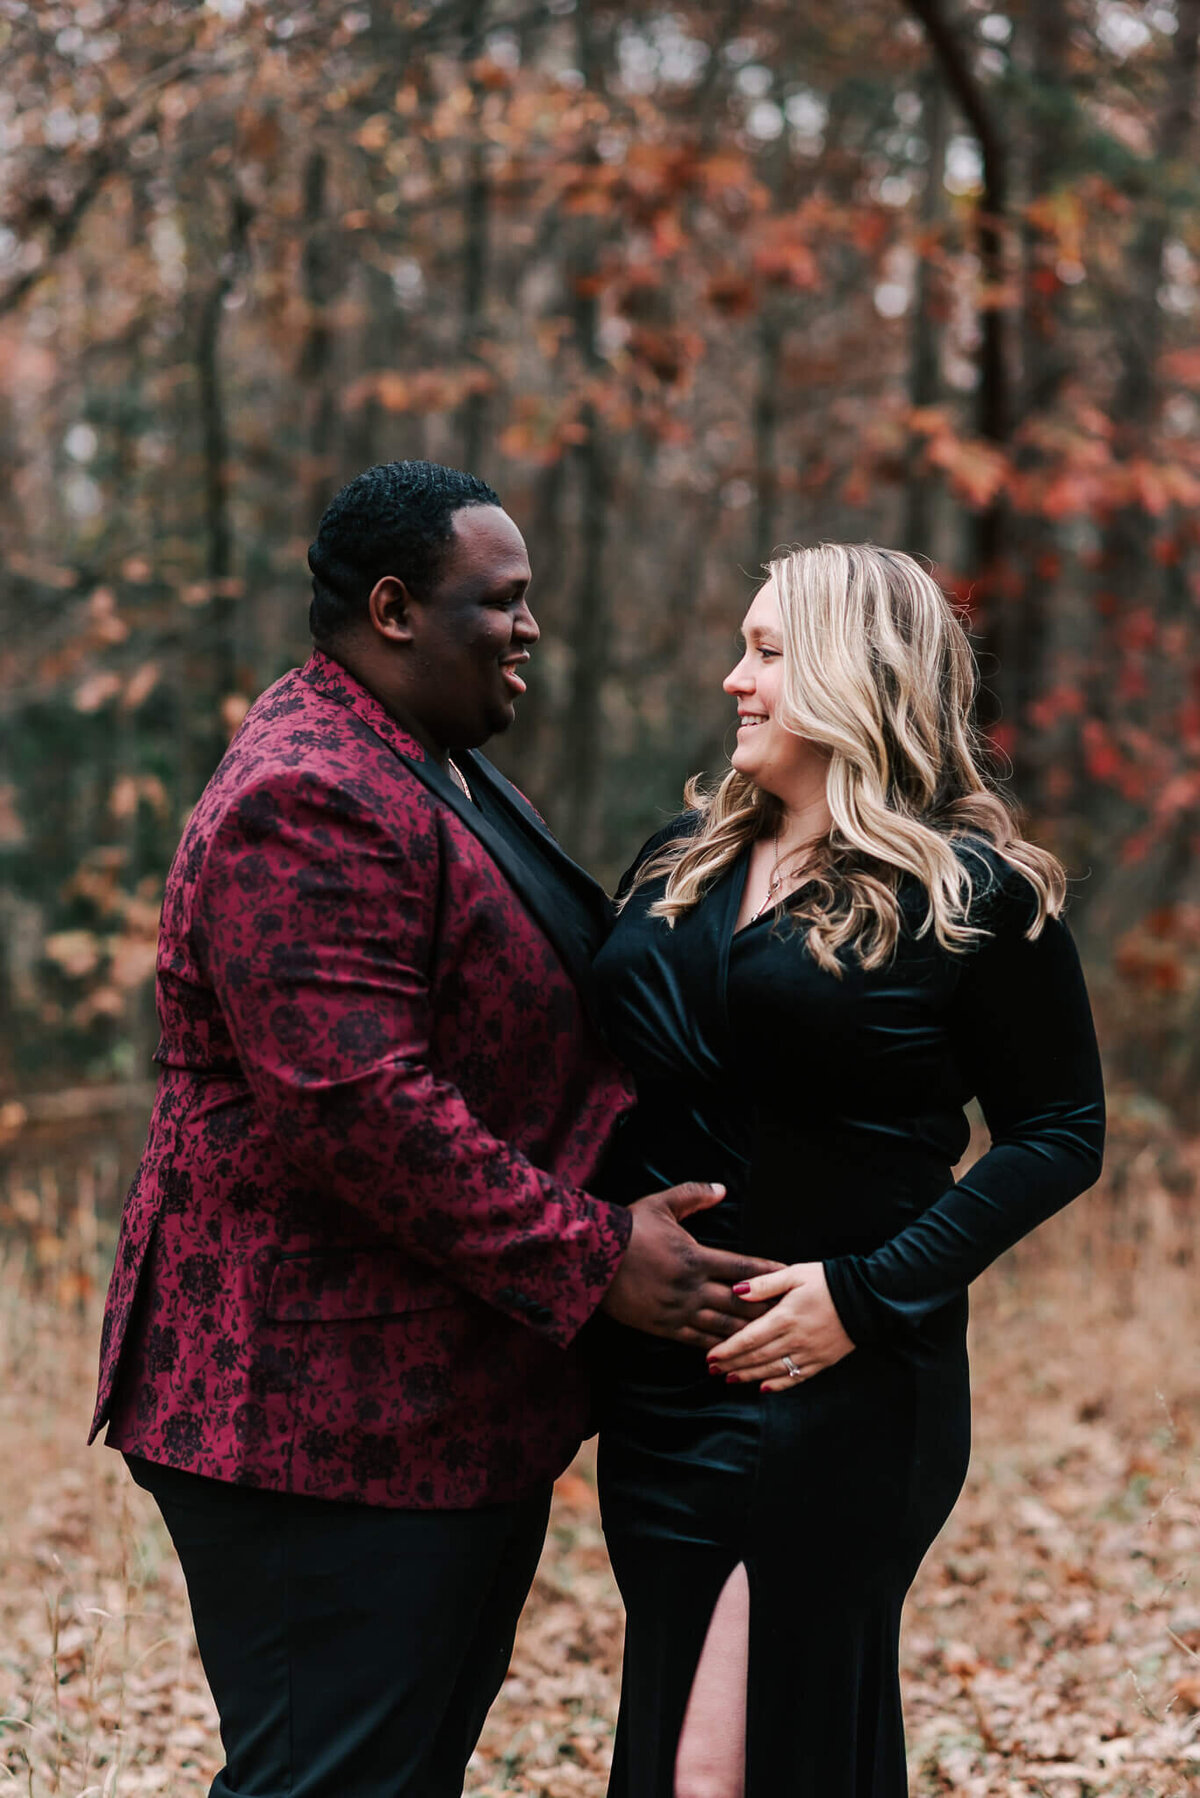 A pregnant woman clad in black and a man in burgundy smiling happily at each other